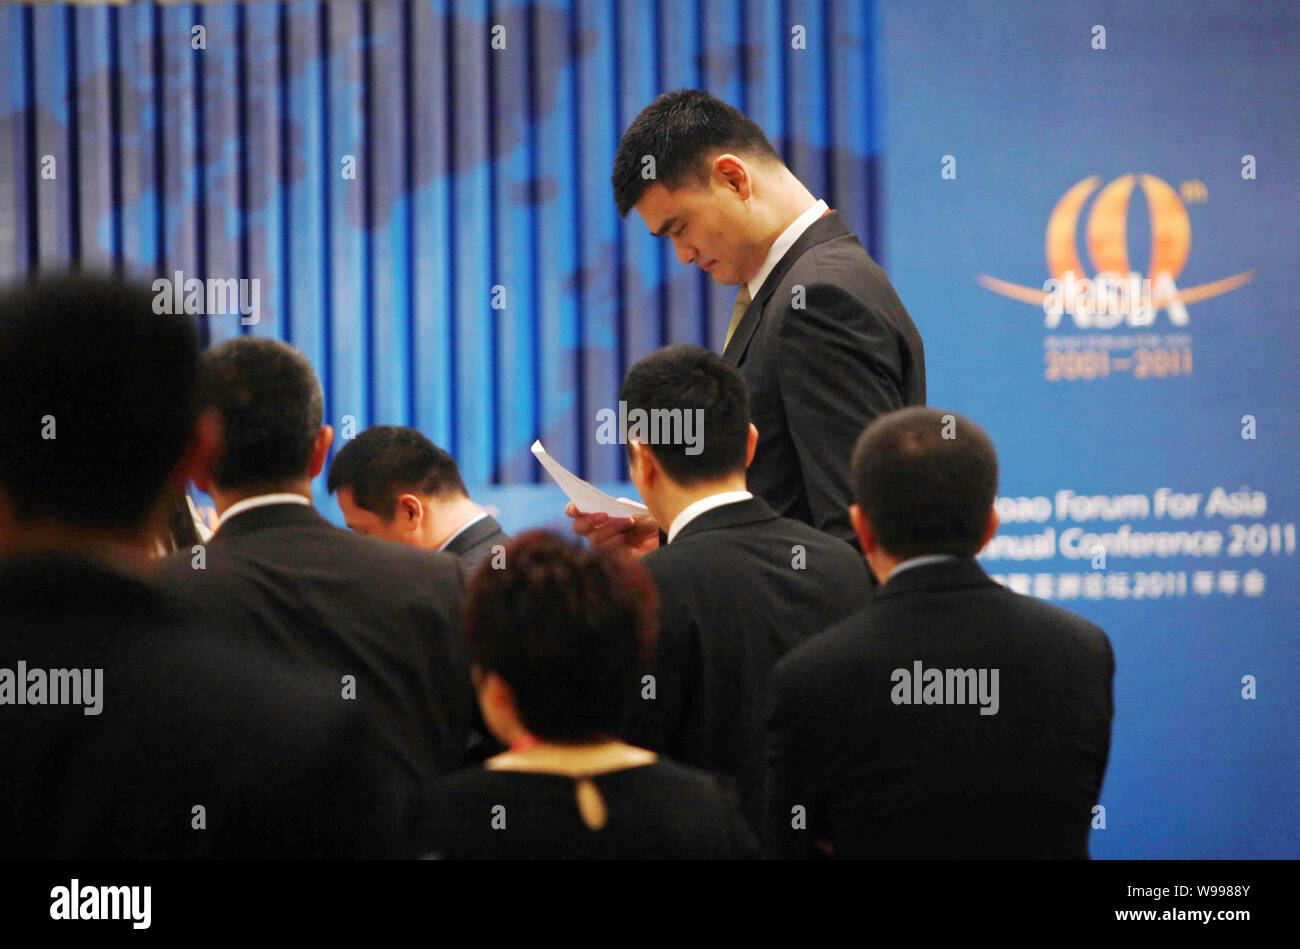 Chinese basketball superstar Yao Ming is pictured during a meeting of the 2011 Boao Forum for Asia Annual Conference in Qionghai city, south Chinas Ha Stock Photo